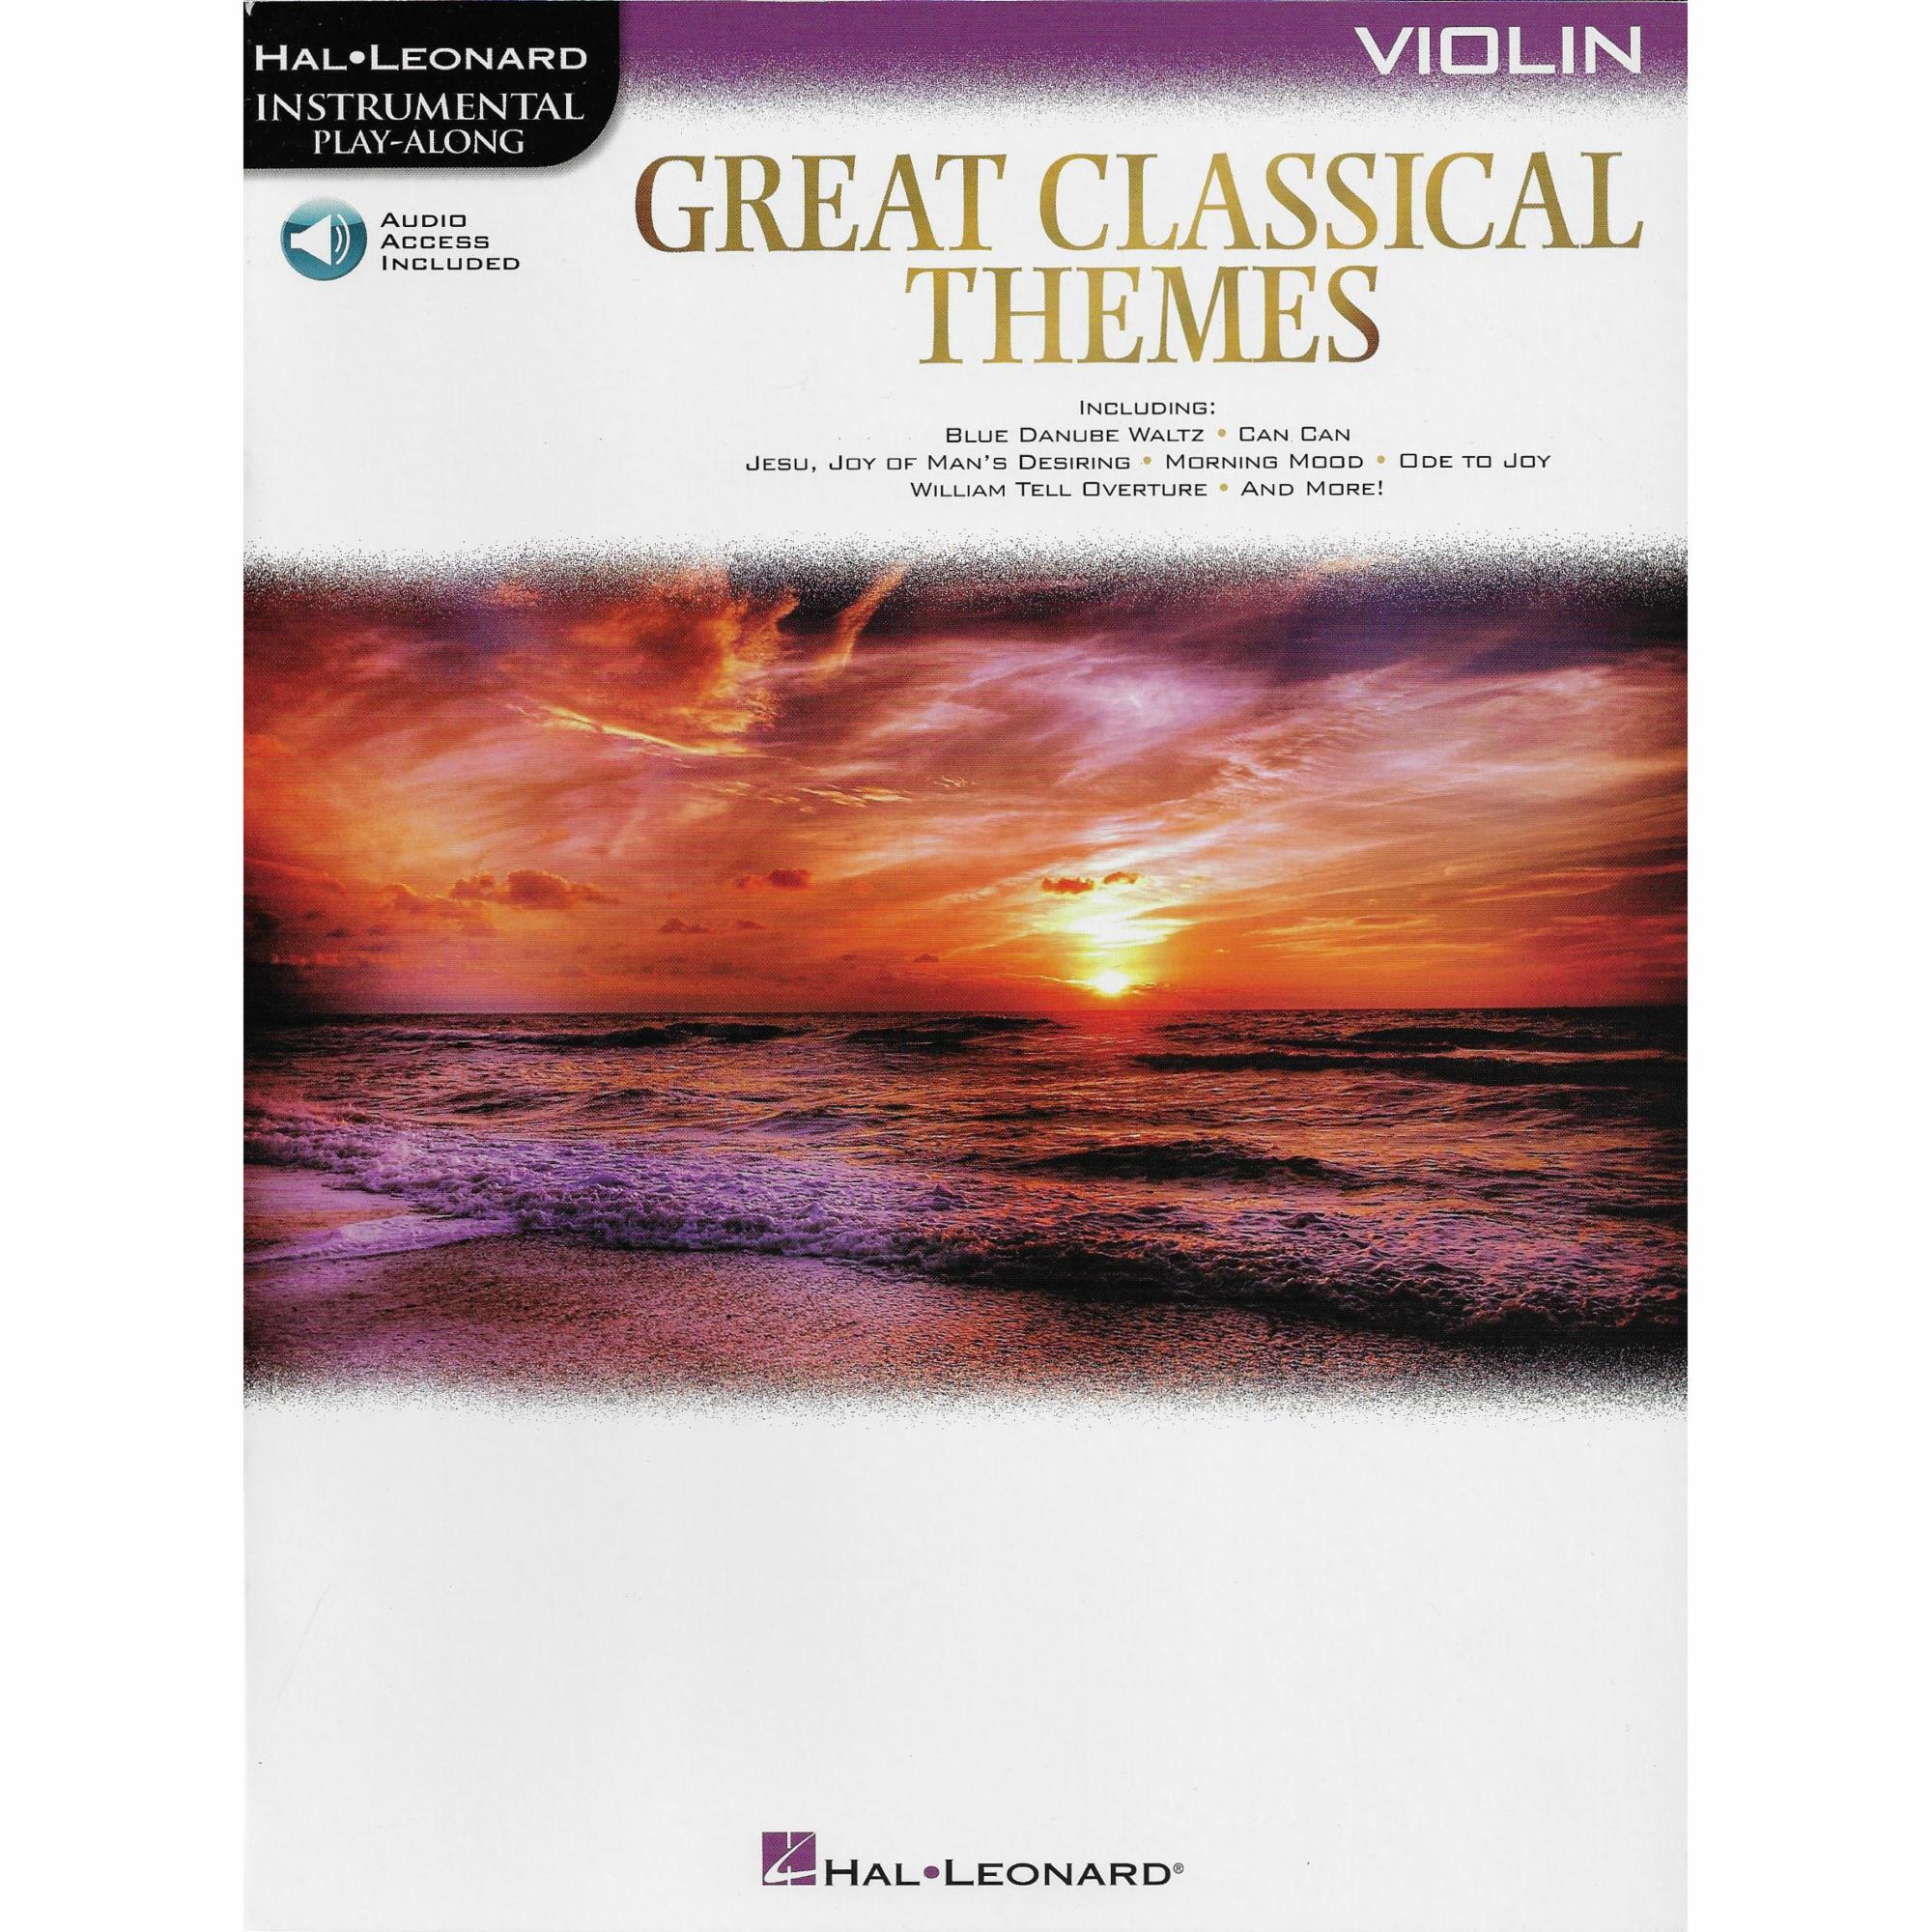 Great Classical Themes for Violin, Viola, or Cello